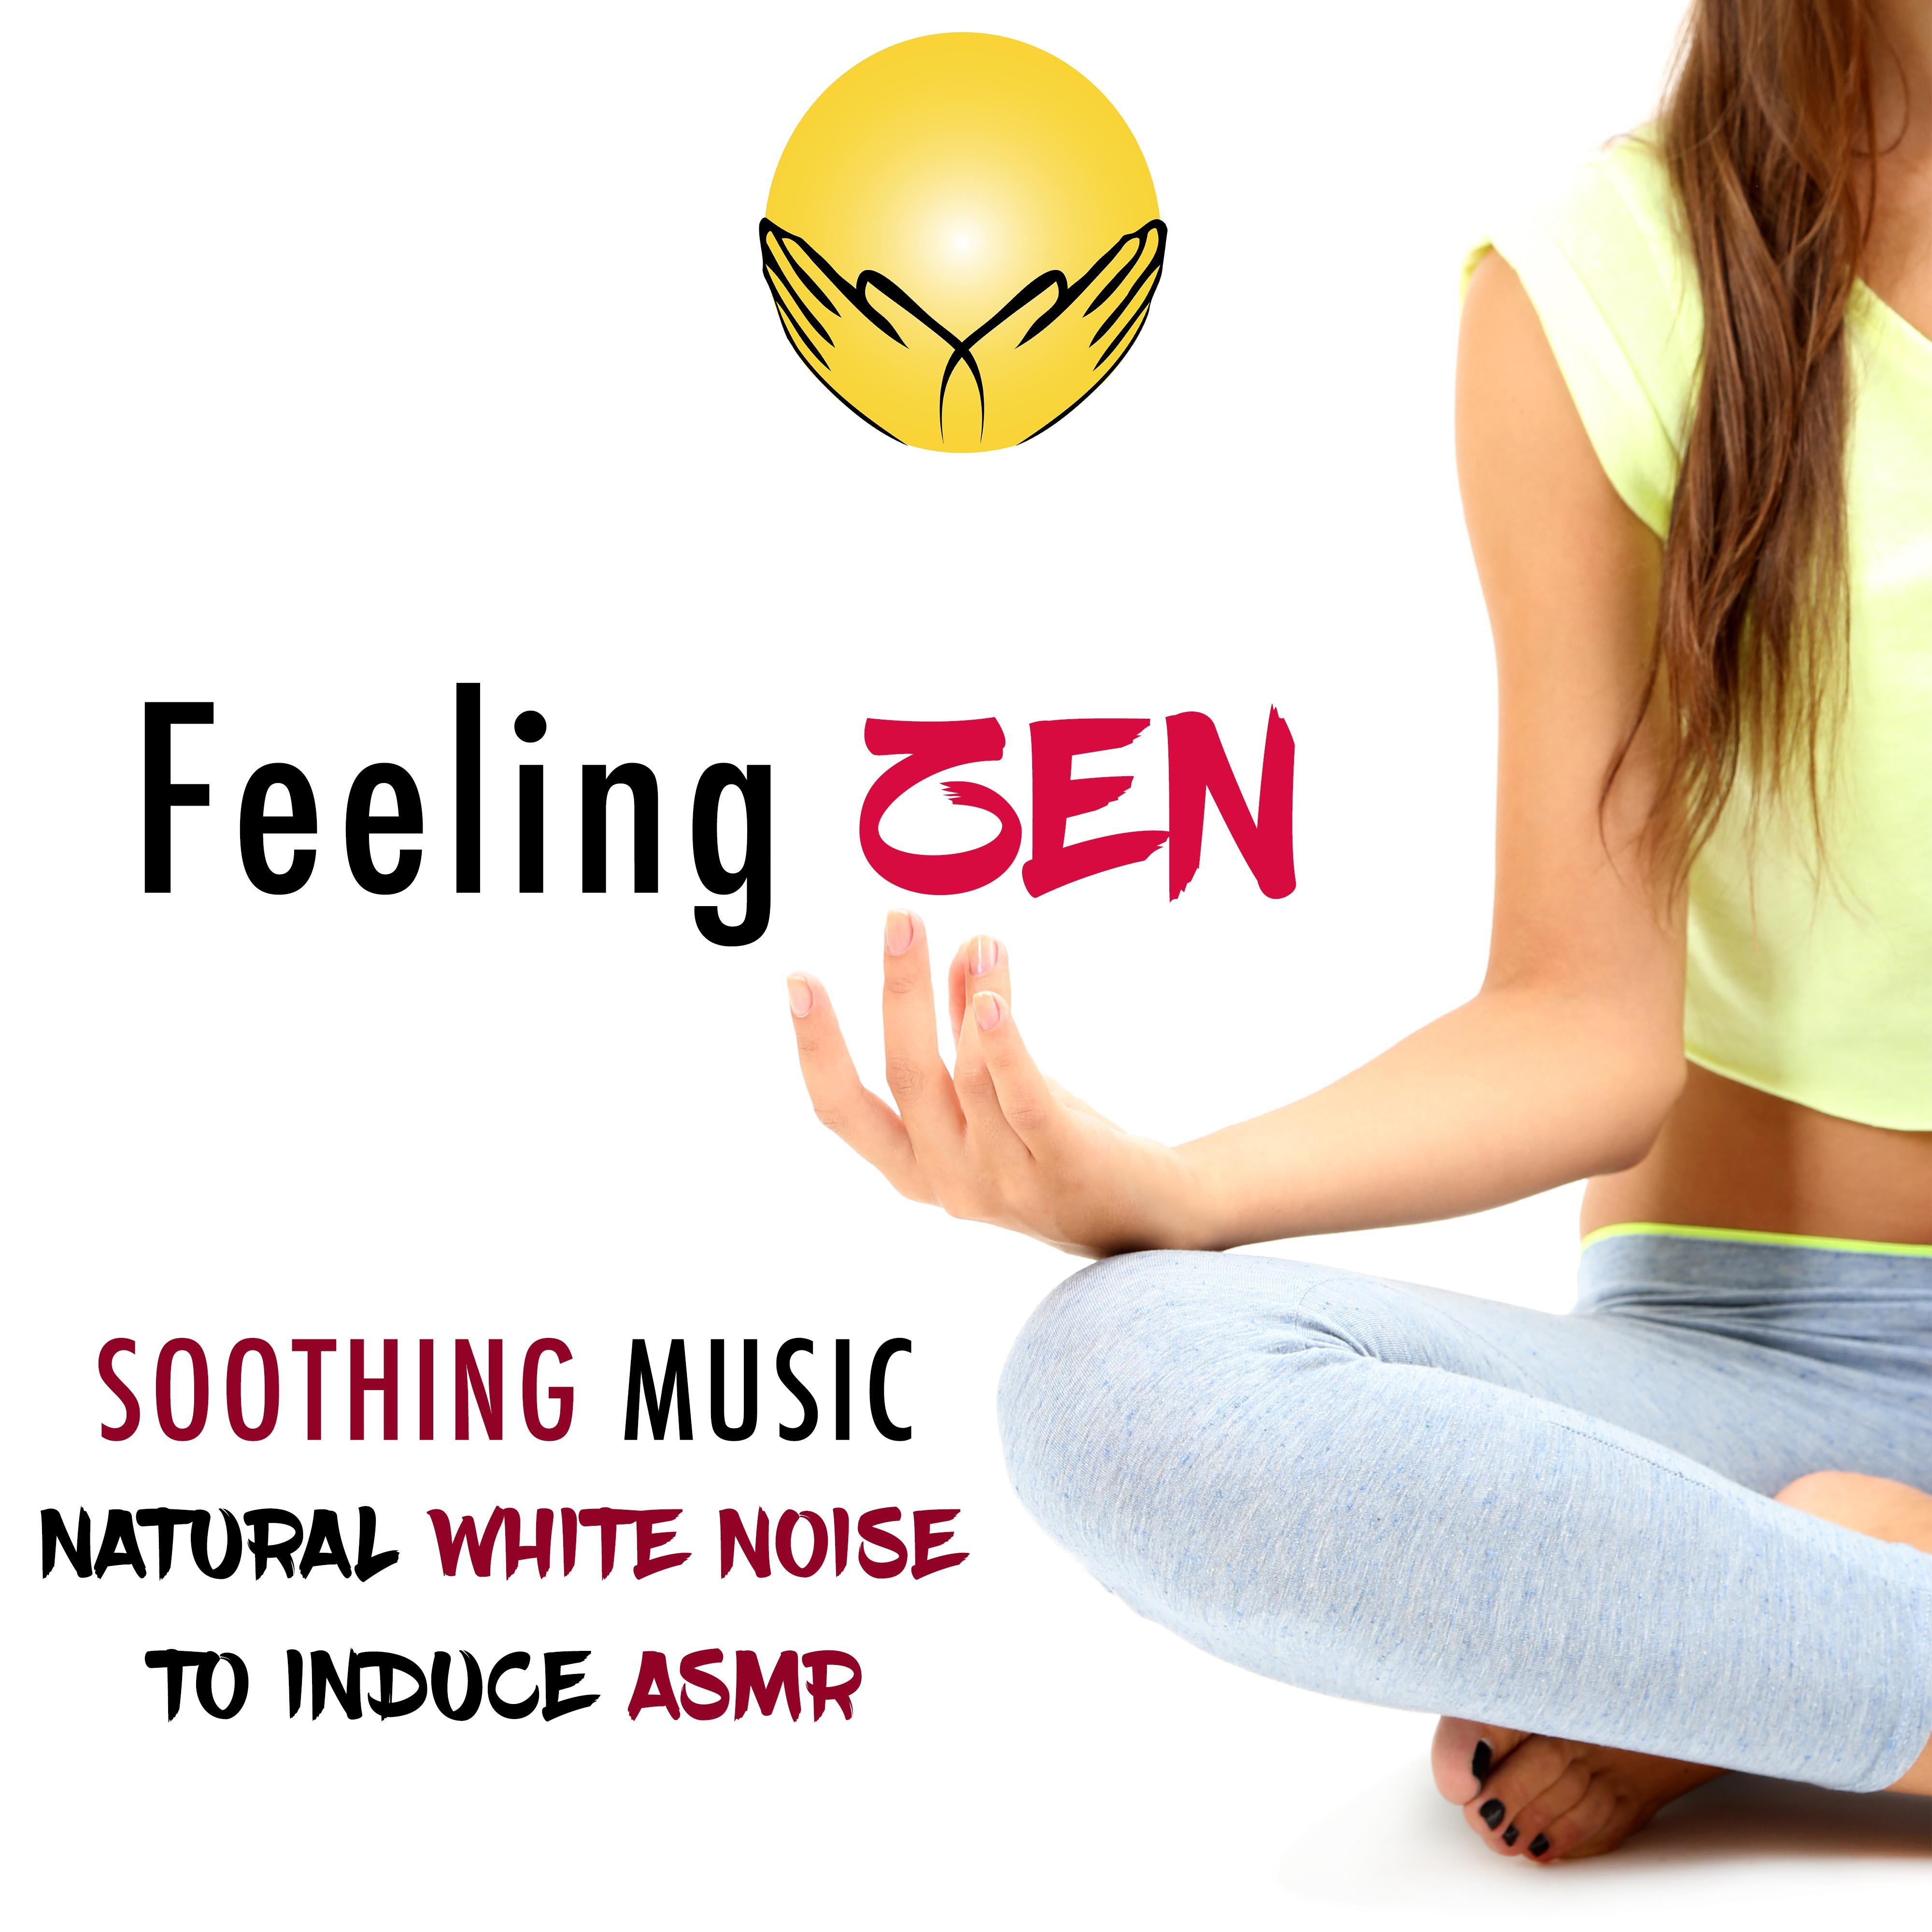 Feeling Zen - Natural White Noise and Soothing Music to Help You Sleep and Relax with Nature Sounds to help Induce ASMR